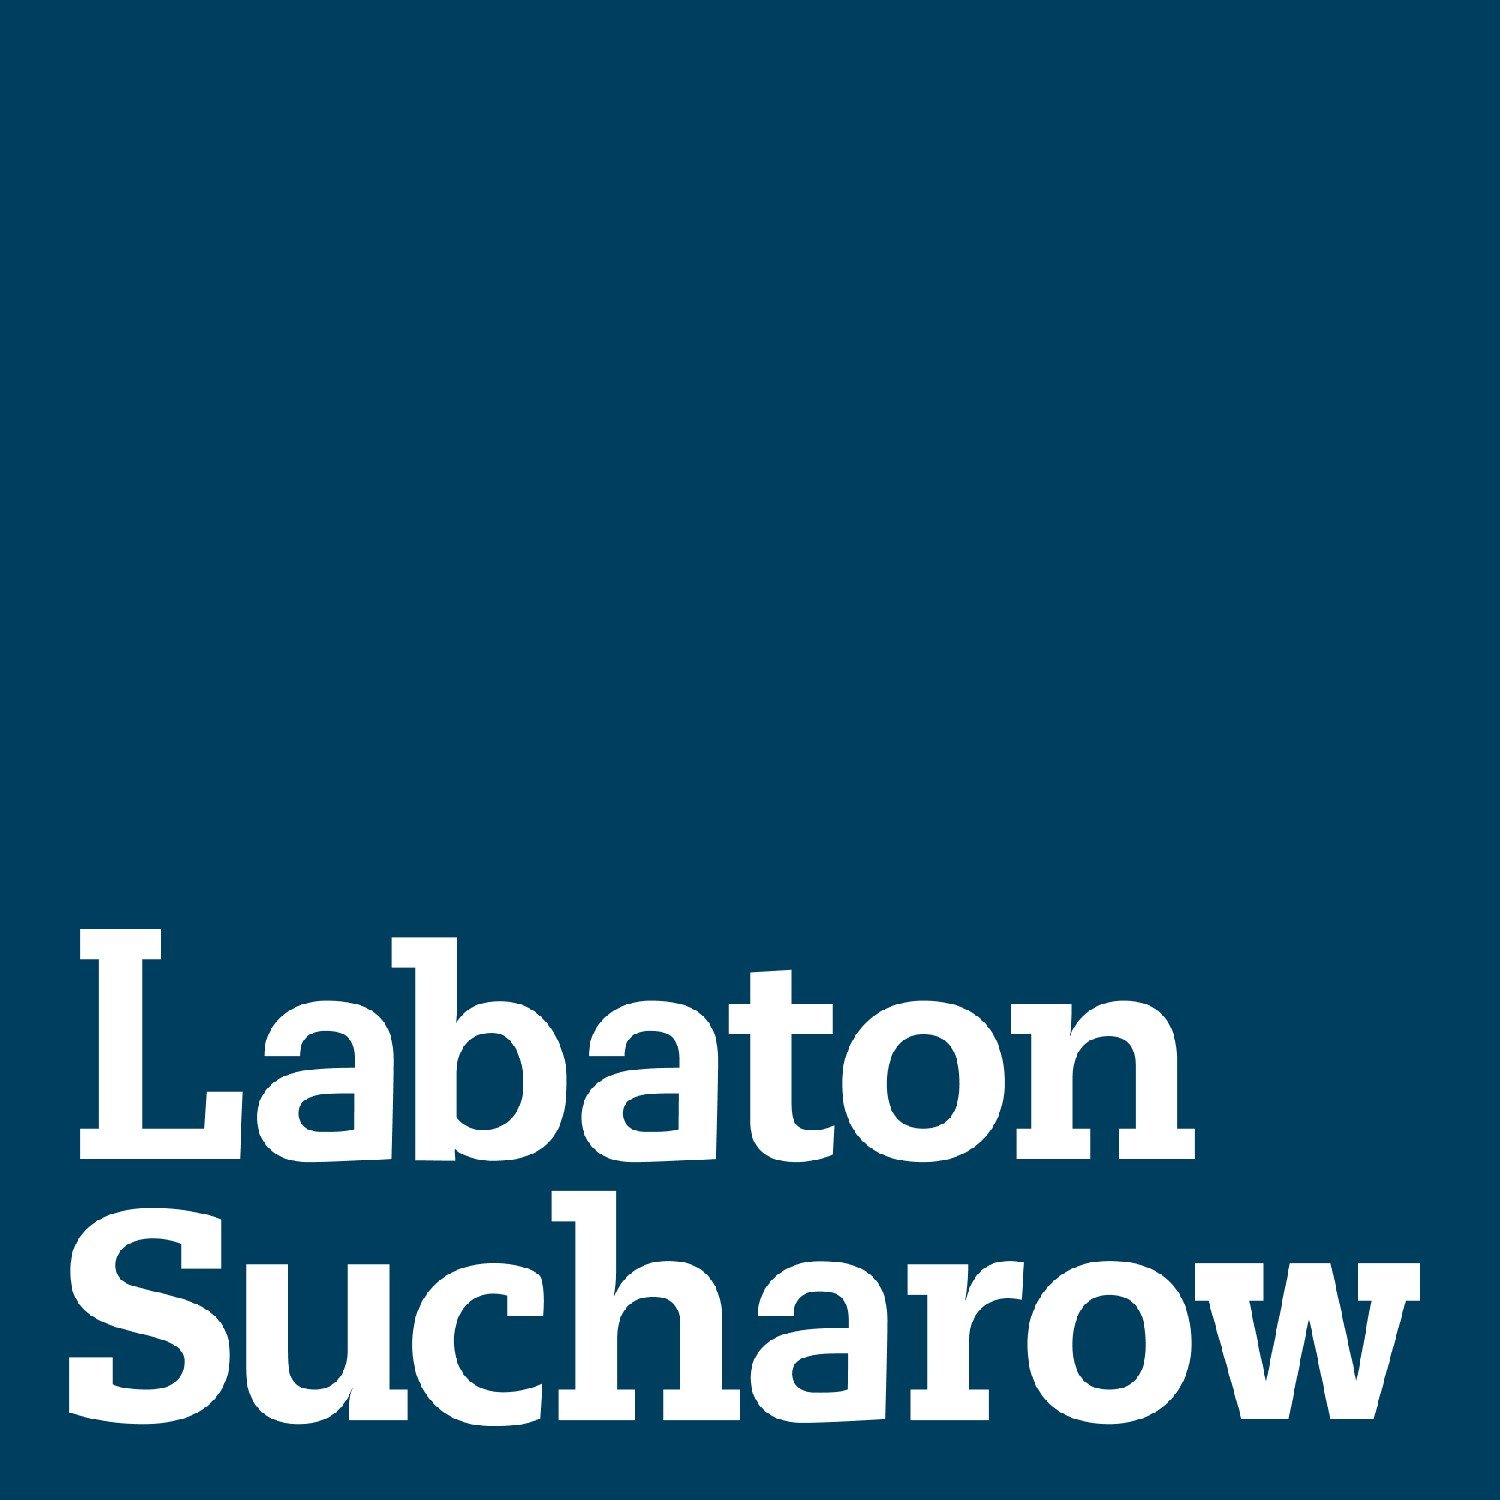 Labaton Sucharow LLP, Tuesday, July 27, 2021, Press release picture